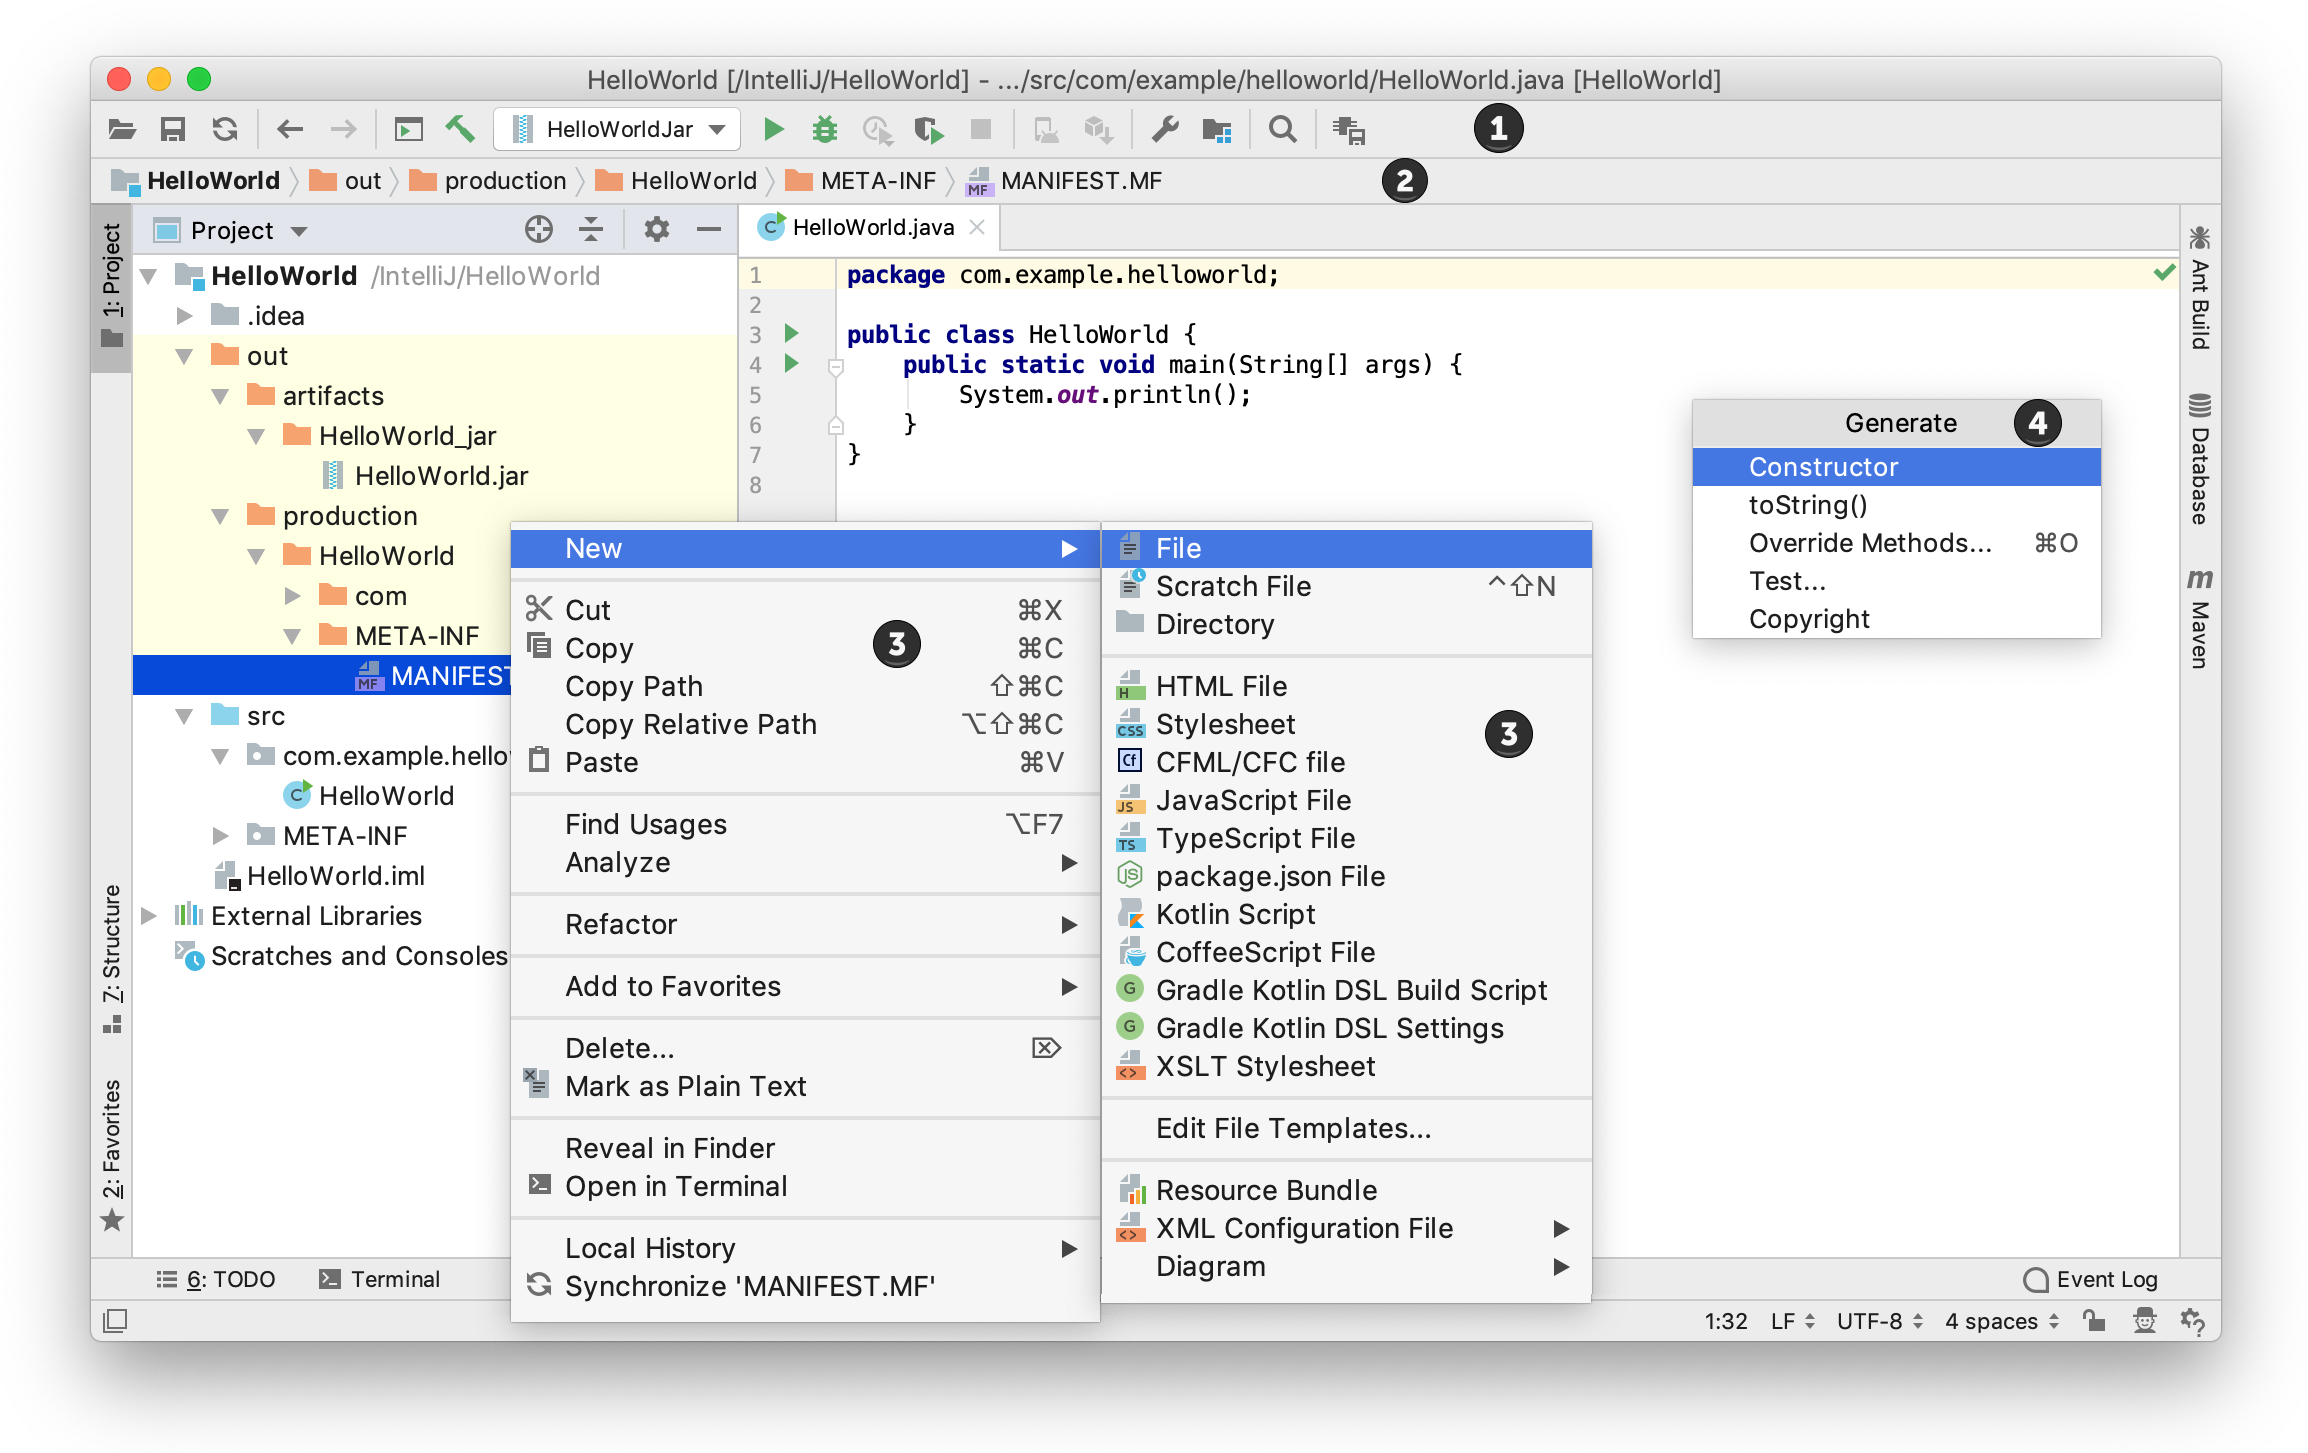 Main elements of the IDE window